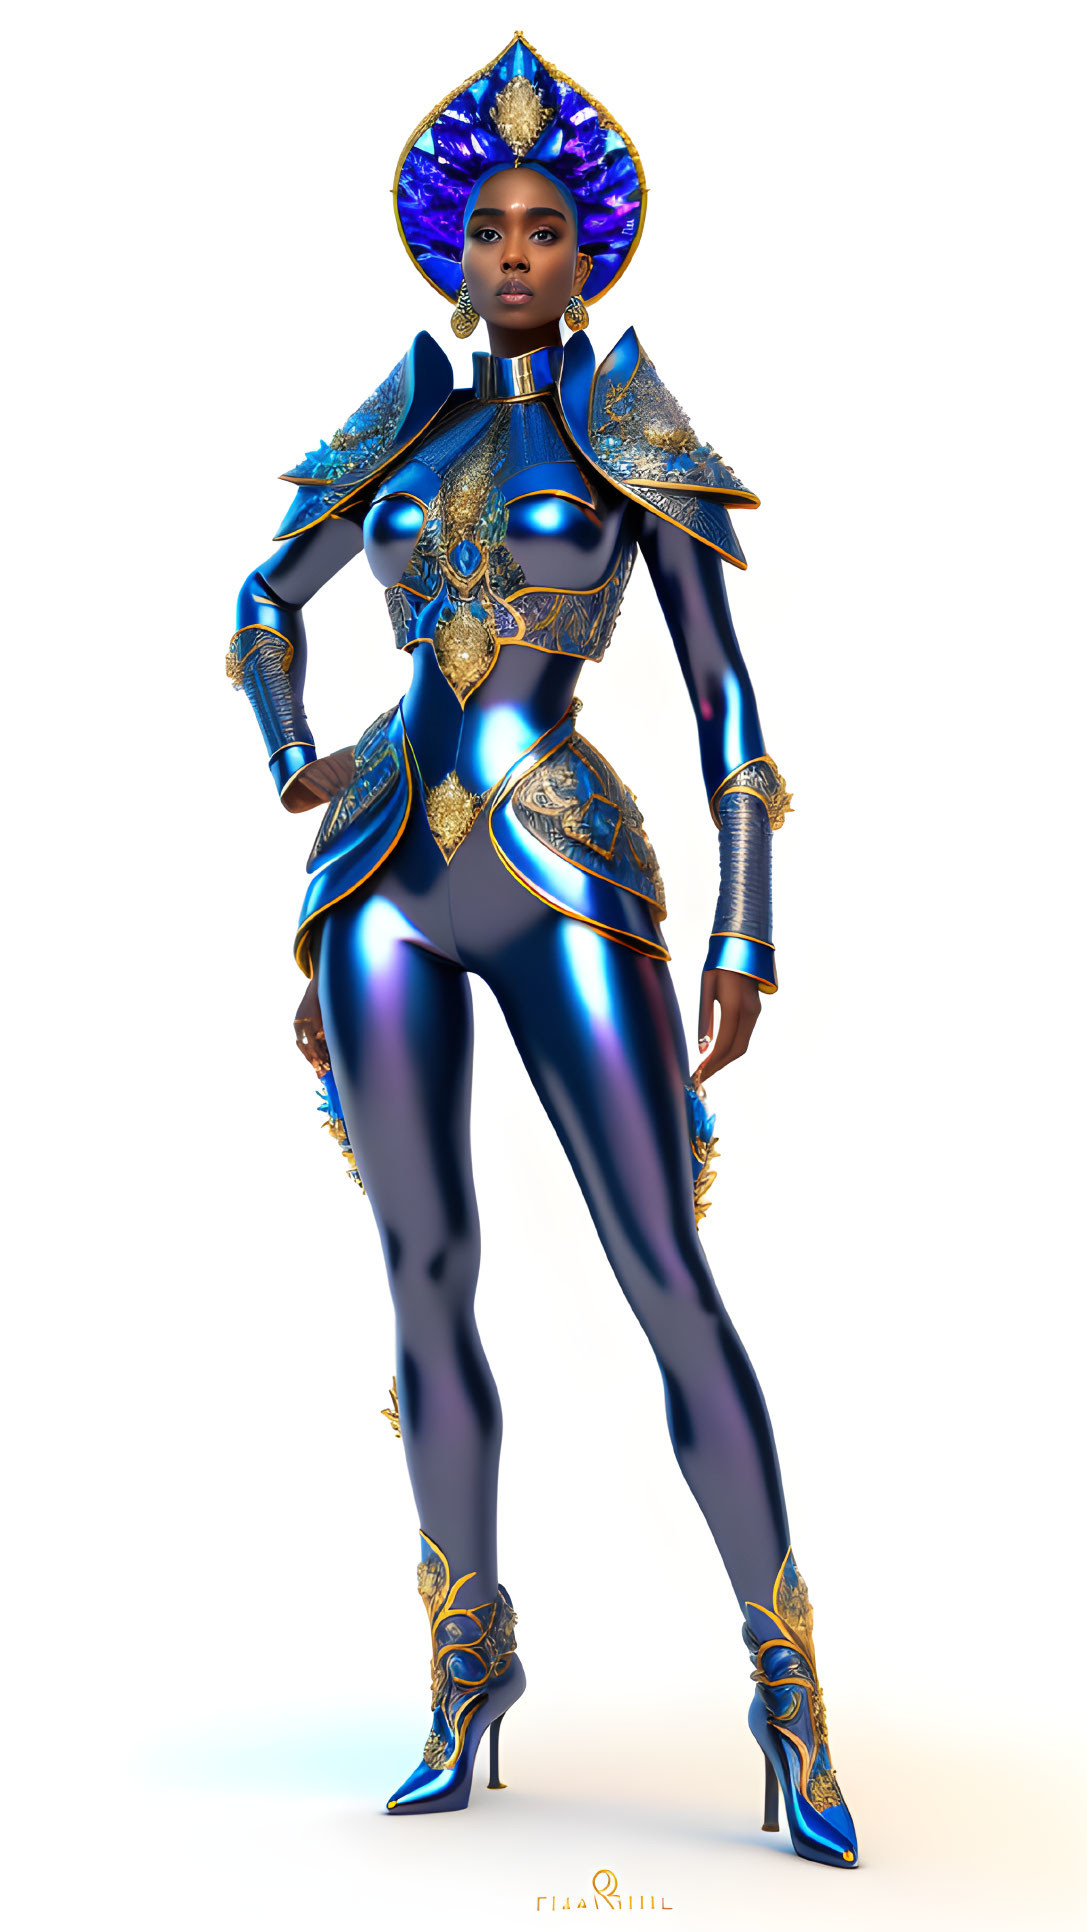 Futuristic female figure in blue and gold armor with shoulder pads and headpiece.